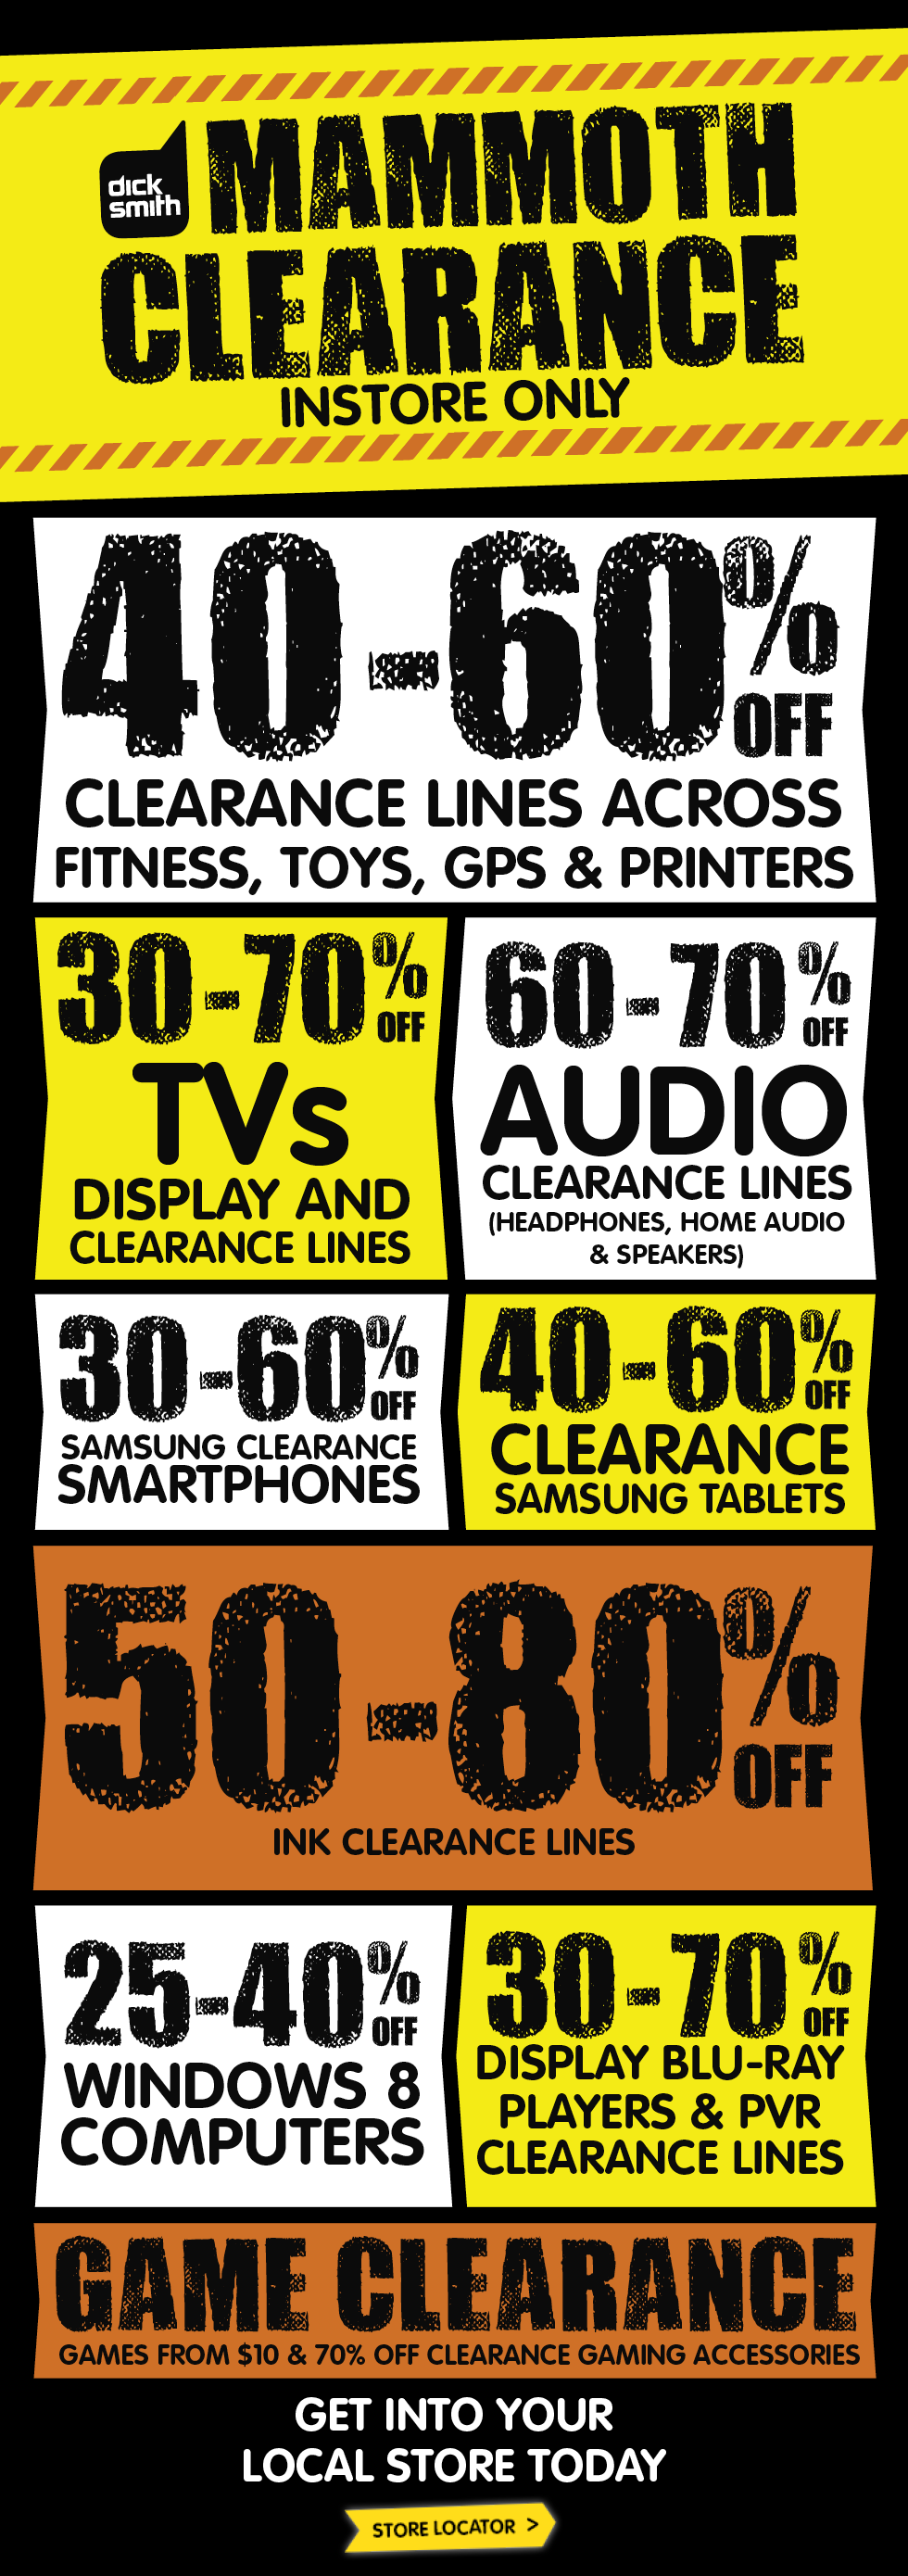 Dick Smith Mammoth Clearance Sale 2015